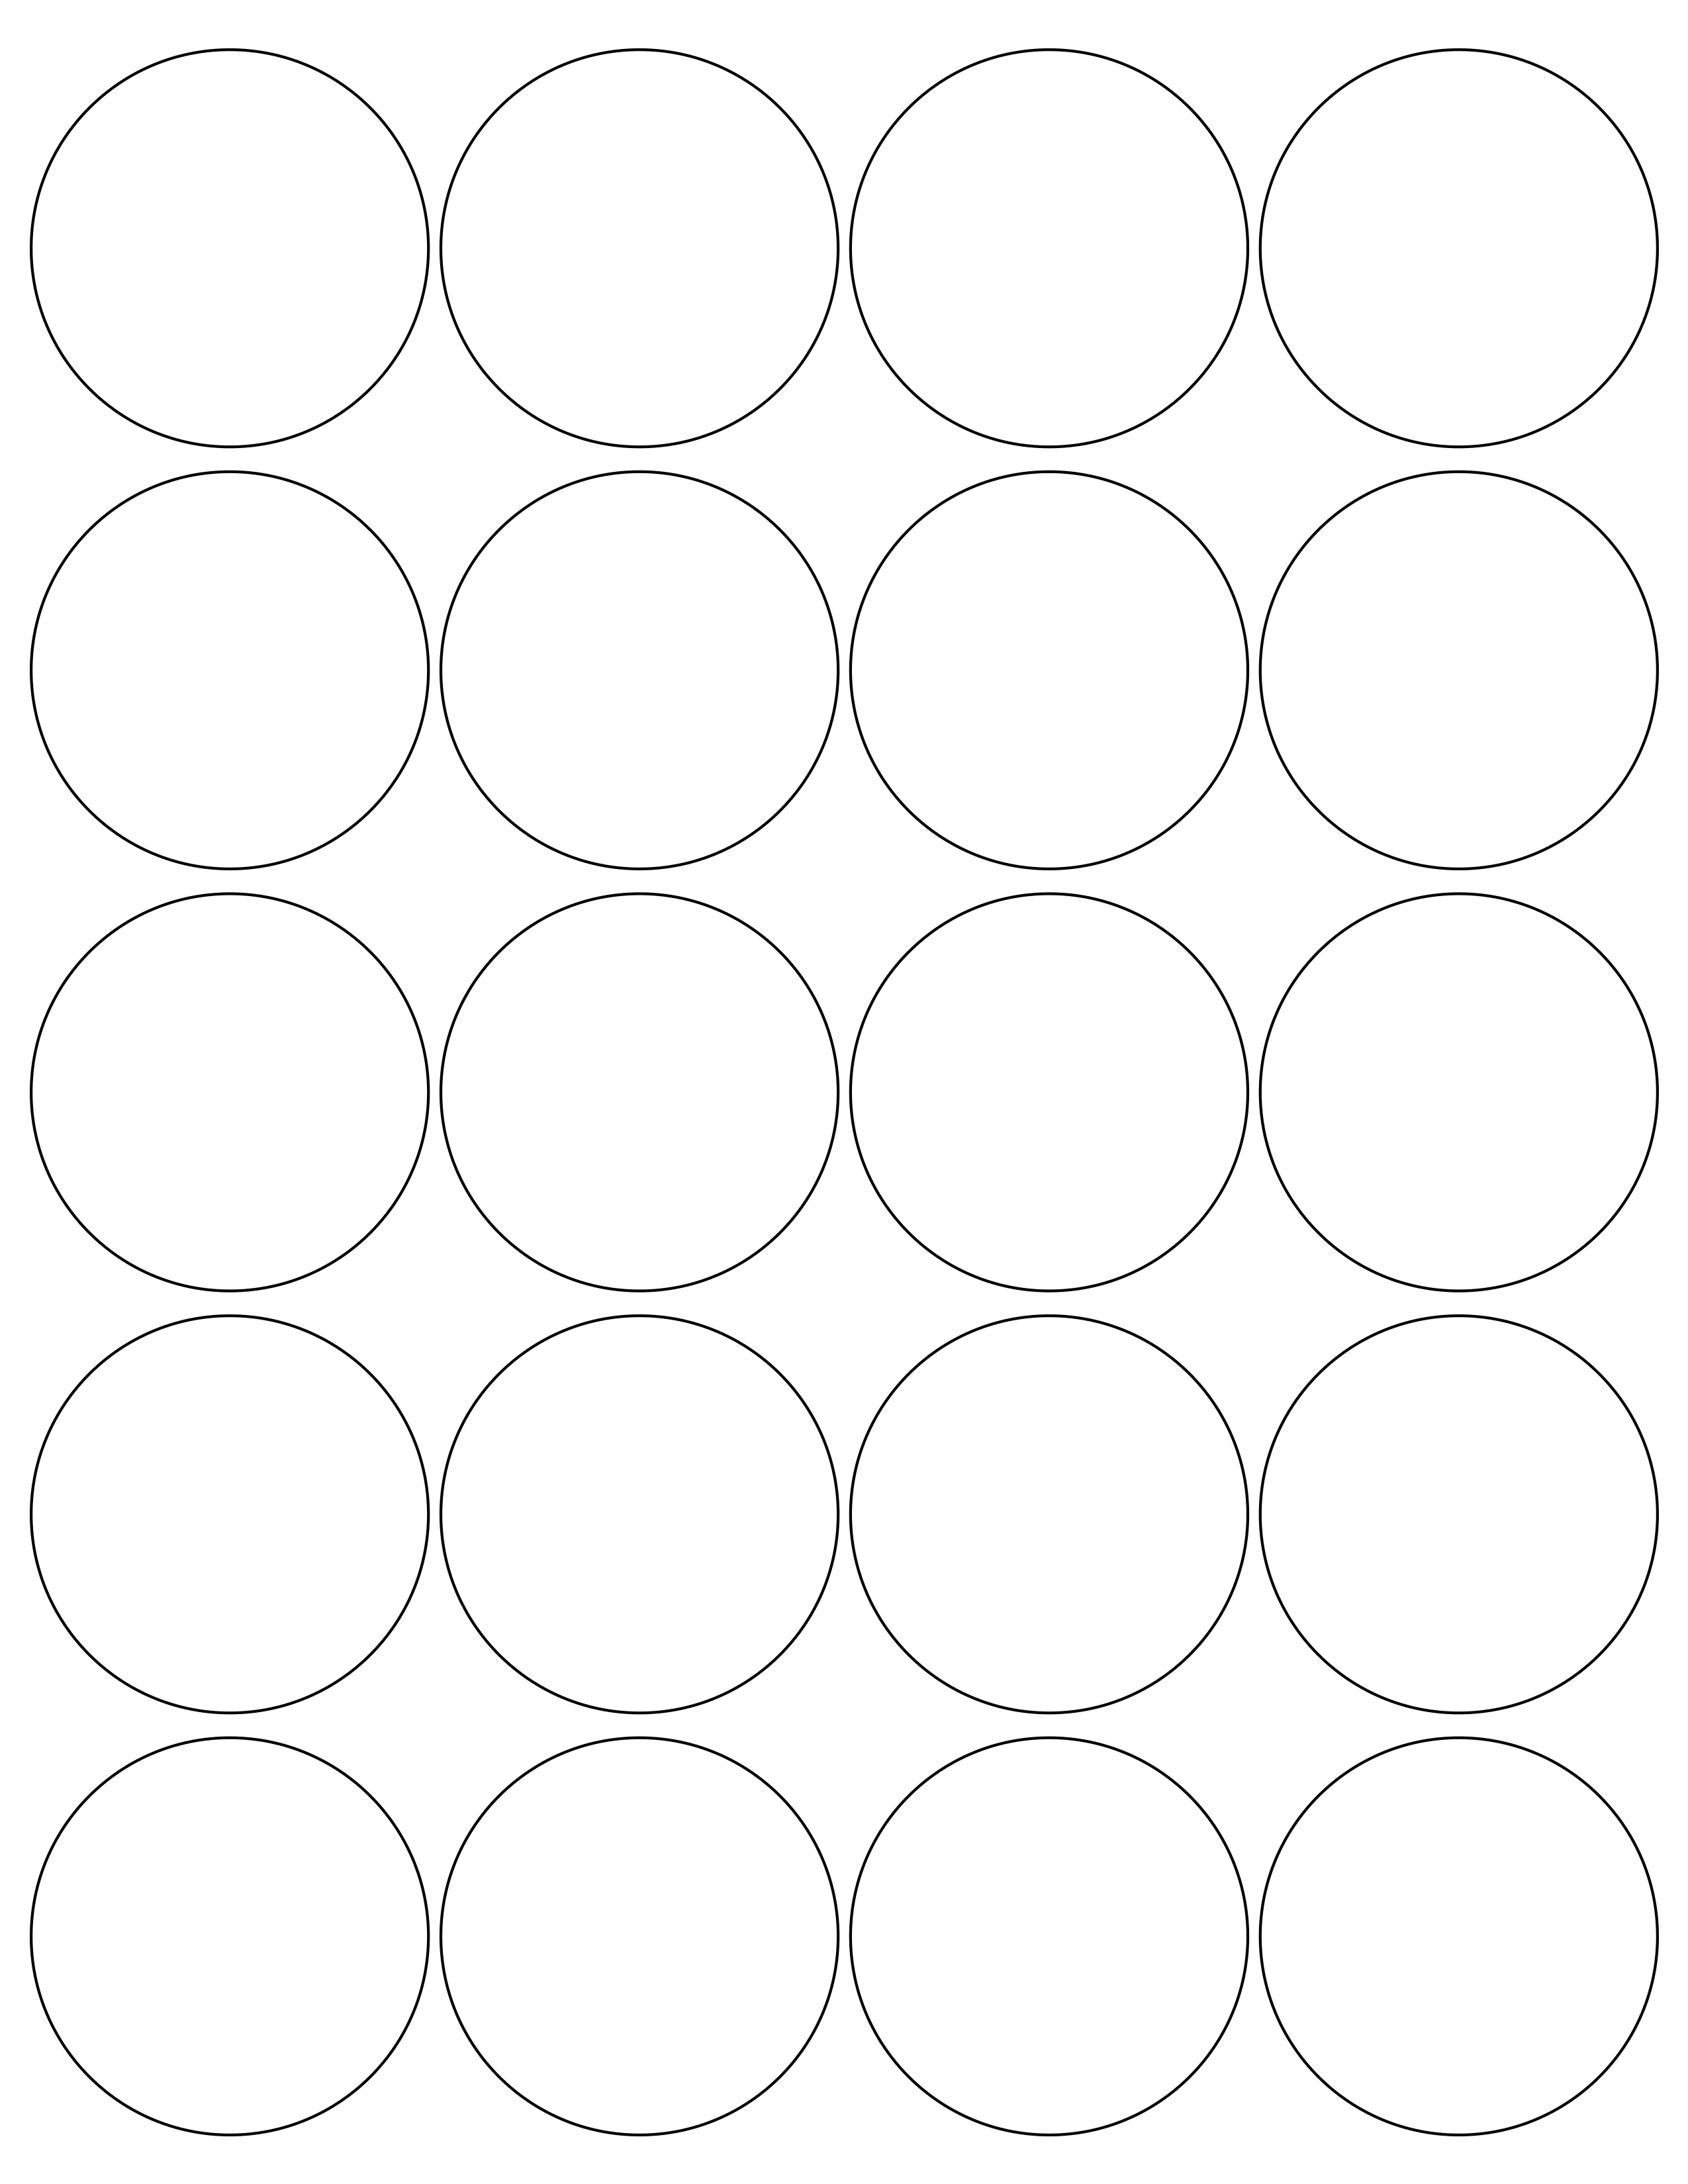 MR233 – Dia. 23″ – US Letter Sheet – 230 Round Labels – MR-LABEL Pertaining To 2 Inch Round Label Template